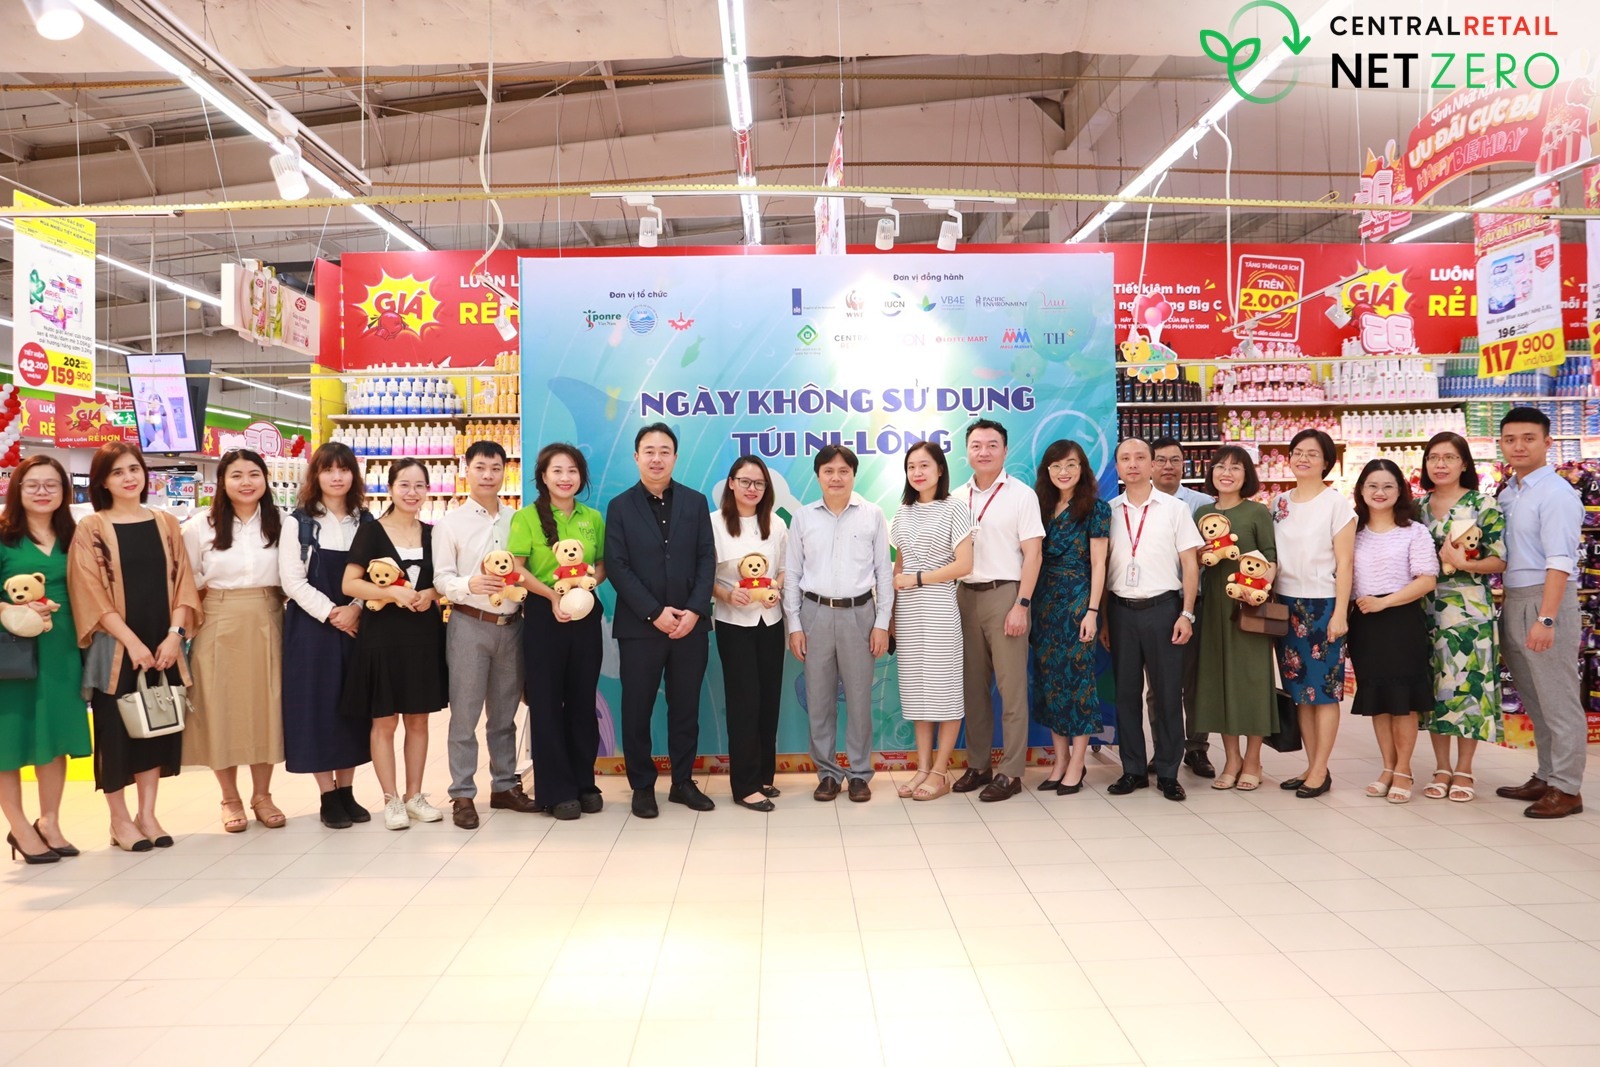 Central Retail launches “No Plastic Bag Day” and “No Plastic Bag Month” intitiatives to promote environmental protection in Vietnam